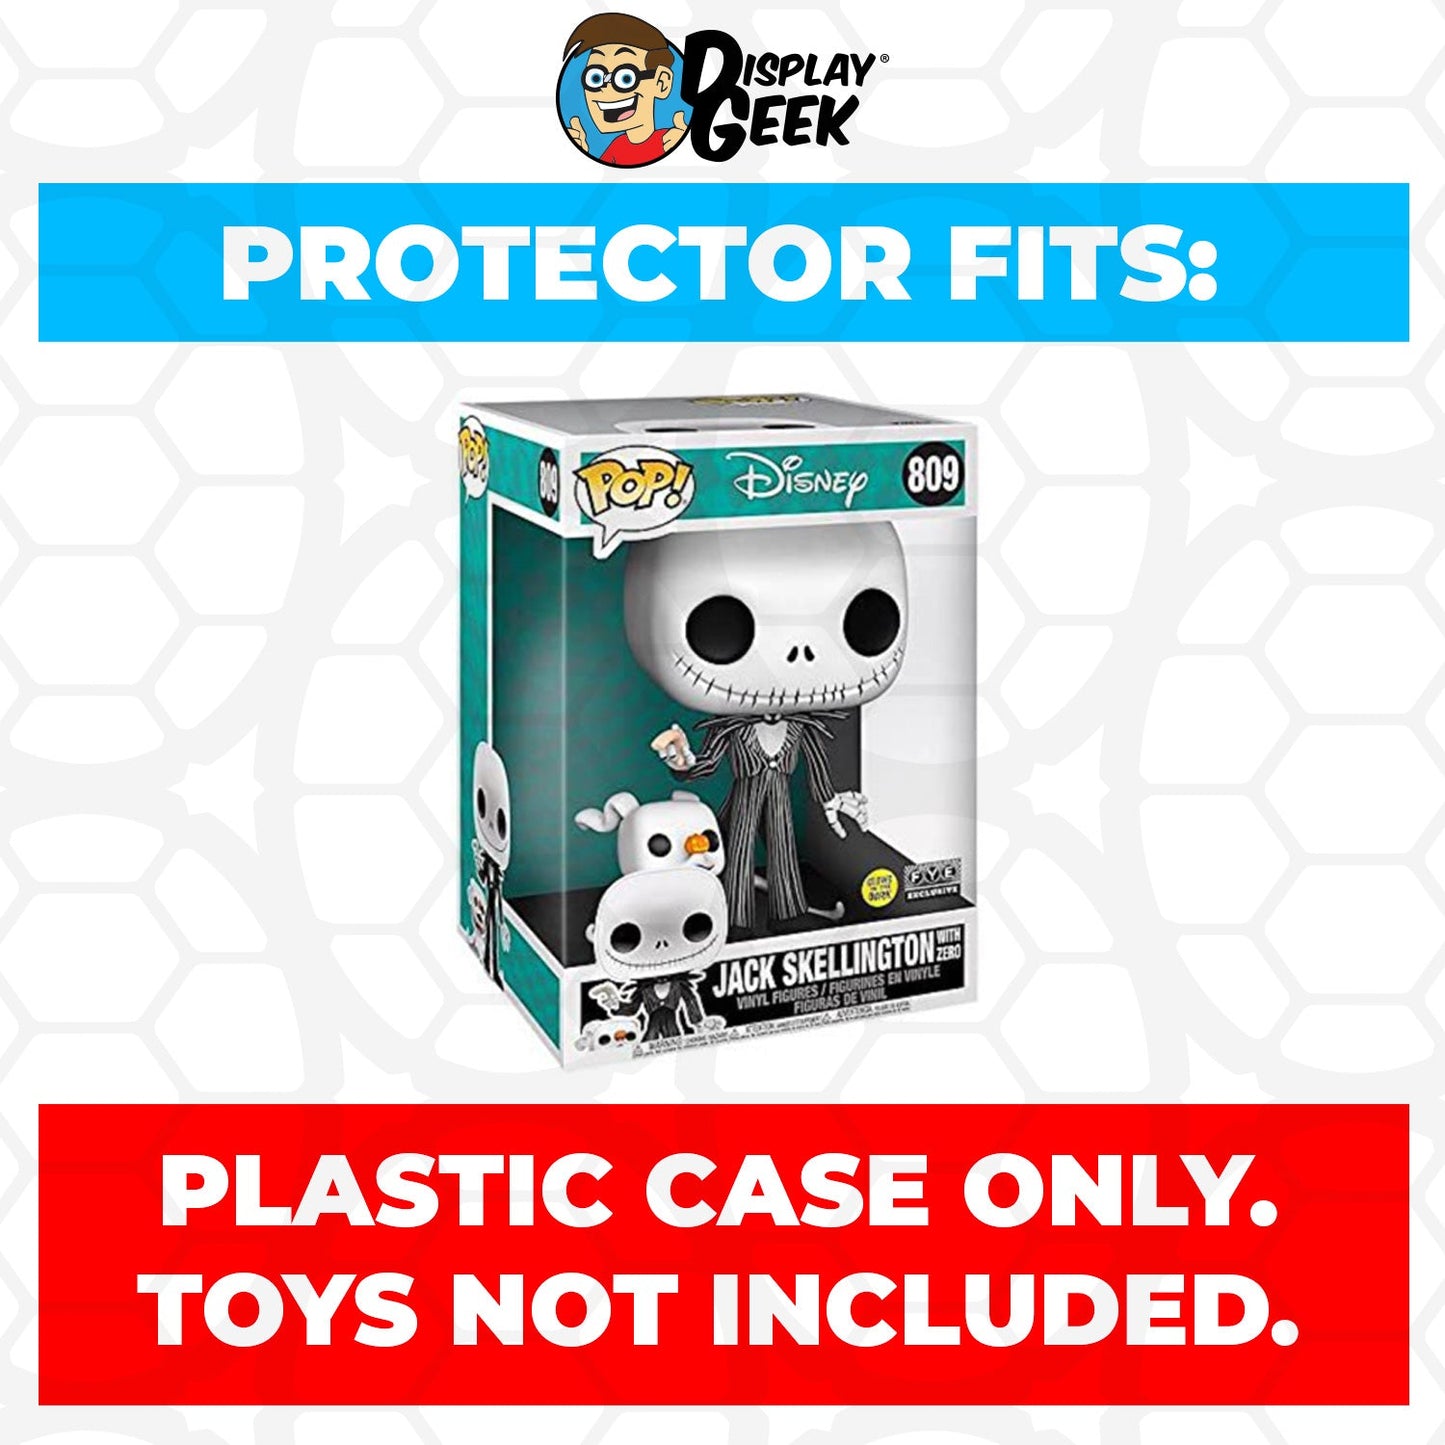 Pop Protector for 10 inch Jack Skellington with Zero #809 Jumbo Funko Pop - PPG Pop Protector Guide Search Created by Display Geek